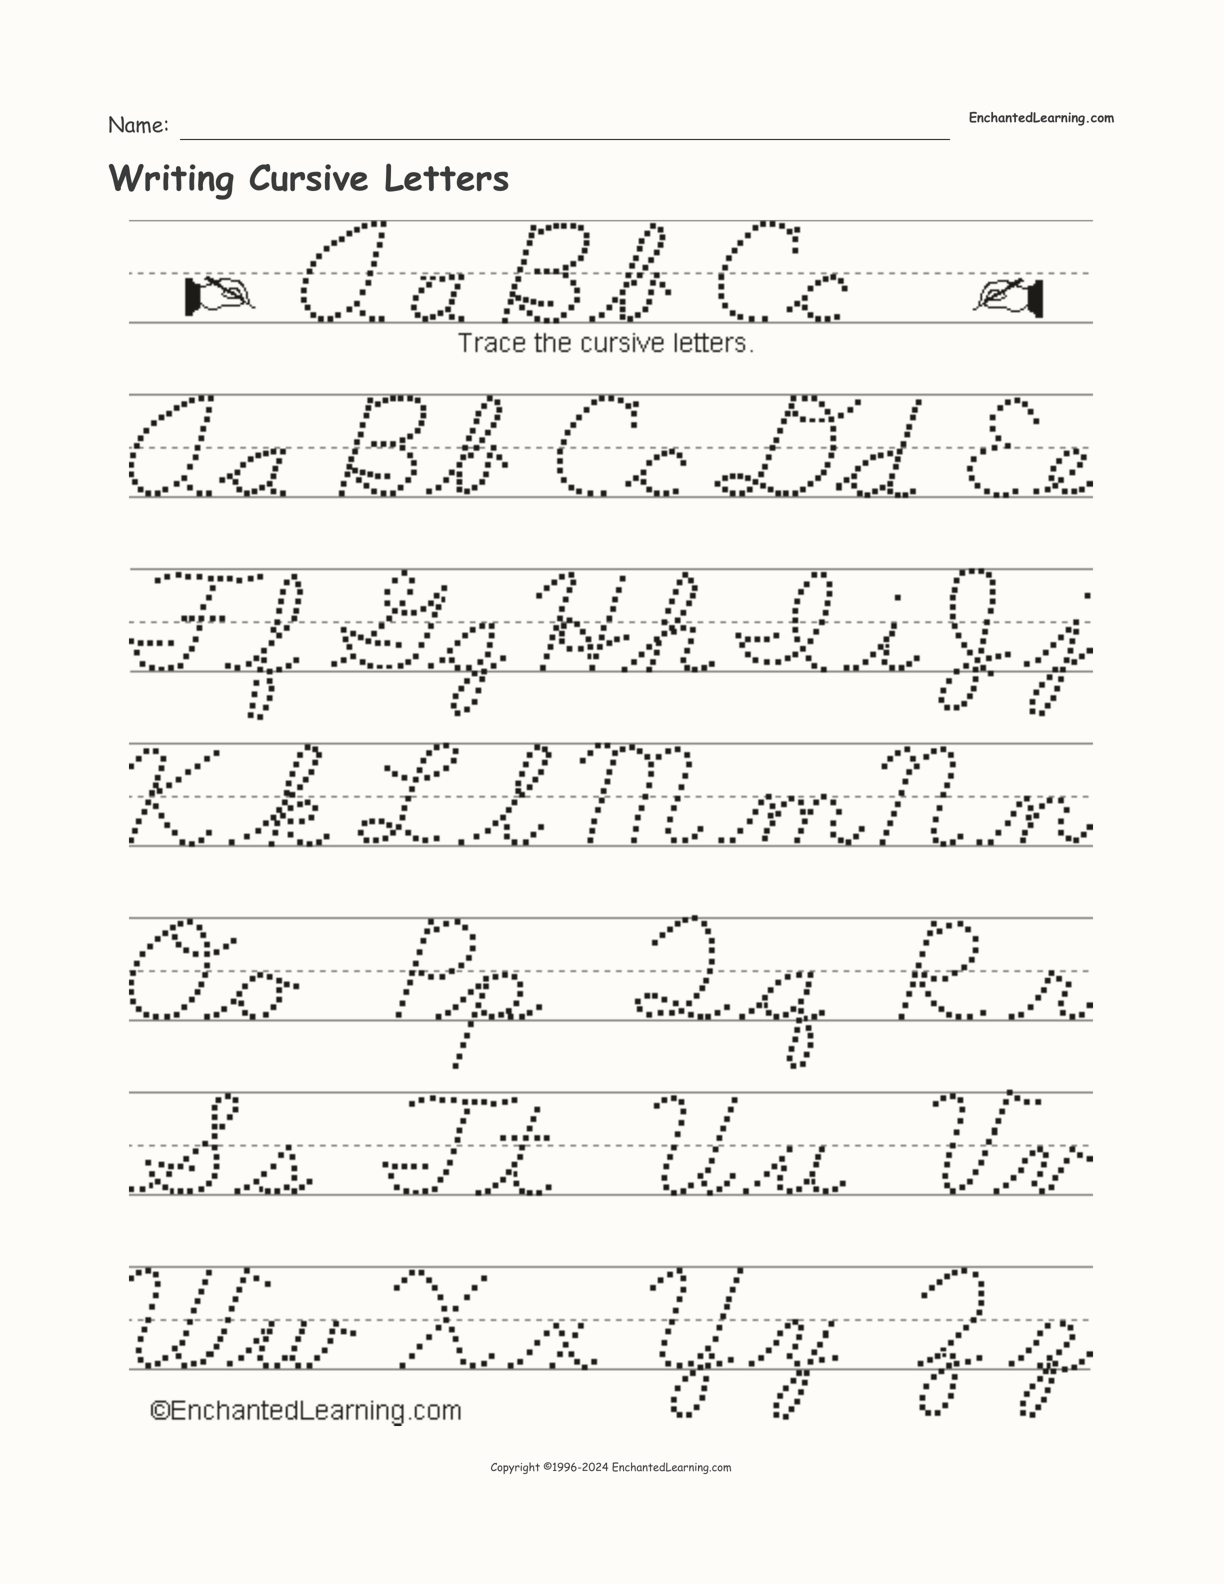 cursive-handwriting-cursive-writing-a-to-z-printable-form-templates-and-letter